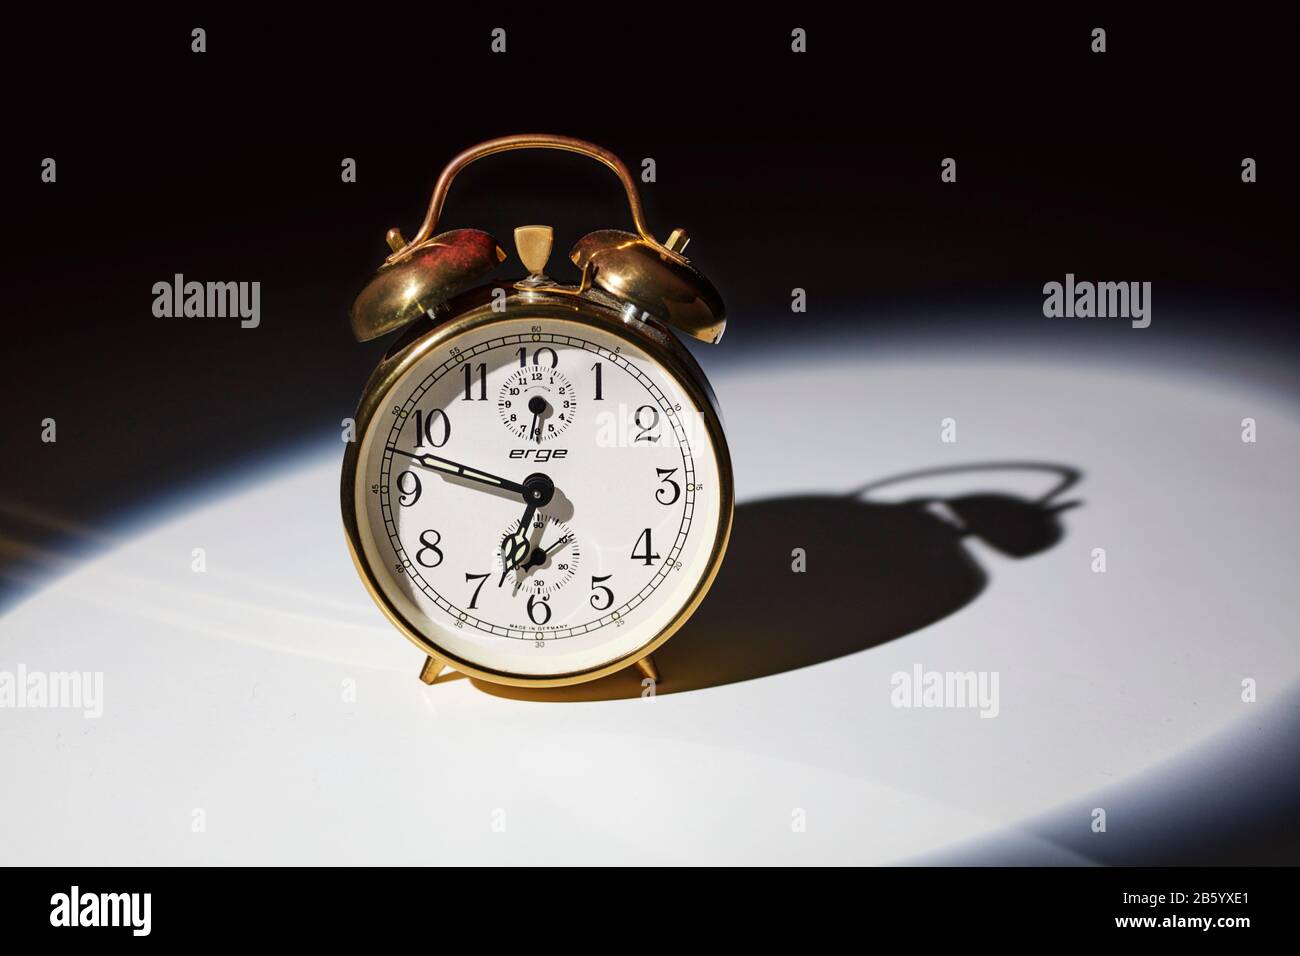 Old fashioned mechanical alarm clock with bells on top with hands at twelve minutes to seven Stock Photo